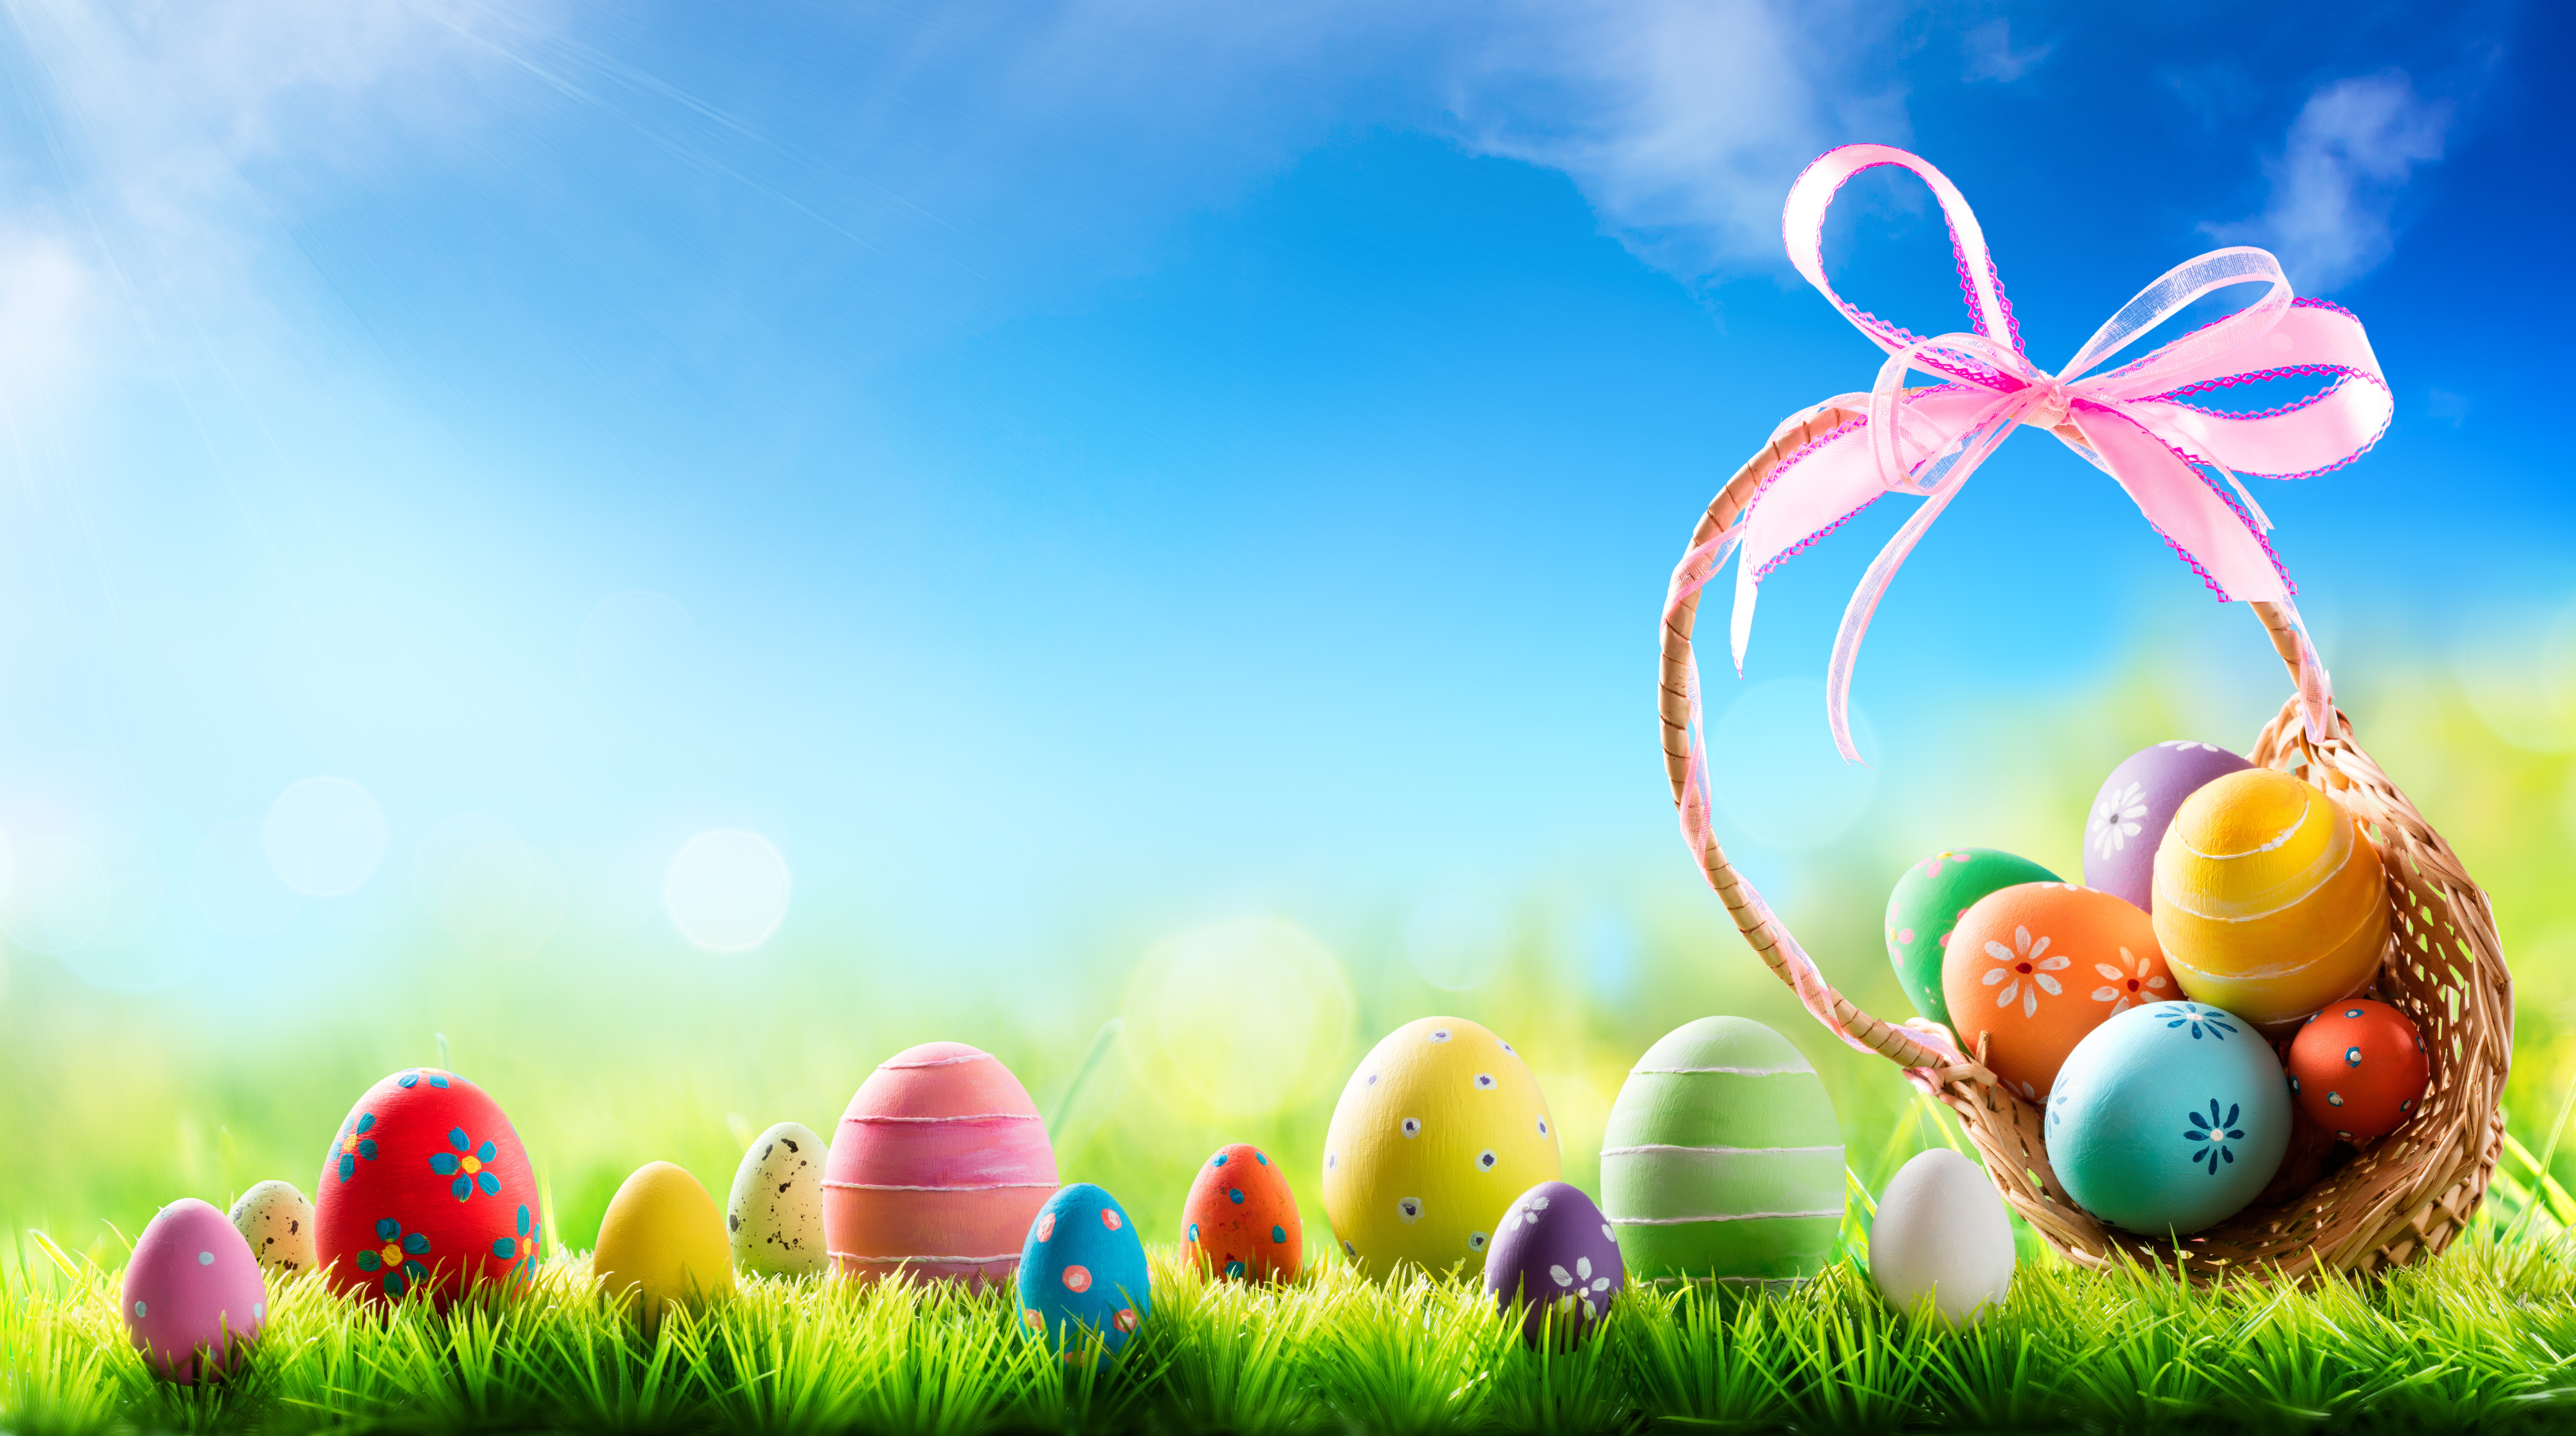 Free HD, 4K, 32K, Ultra HD colorful, holiday, easter egg, sky